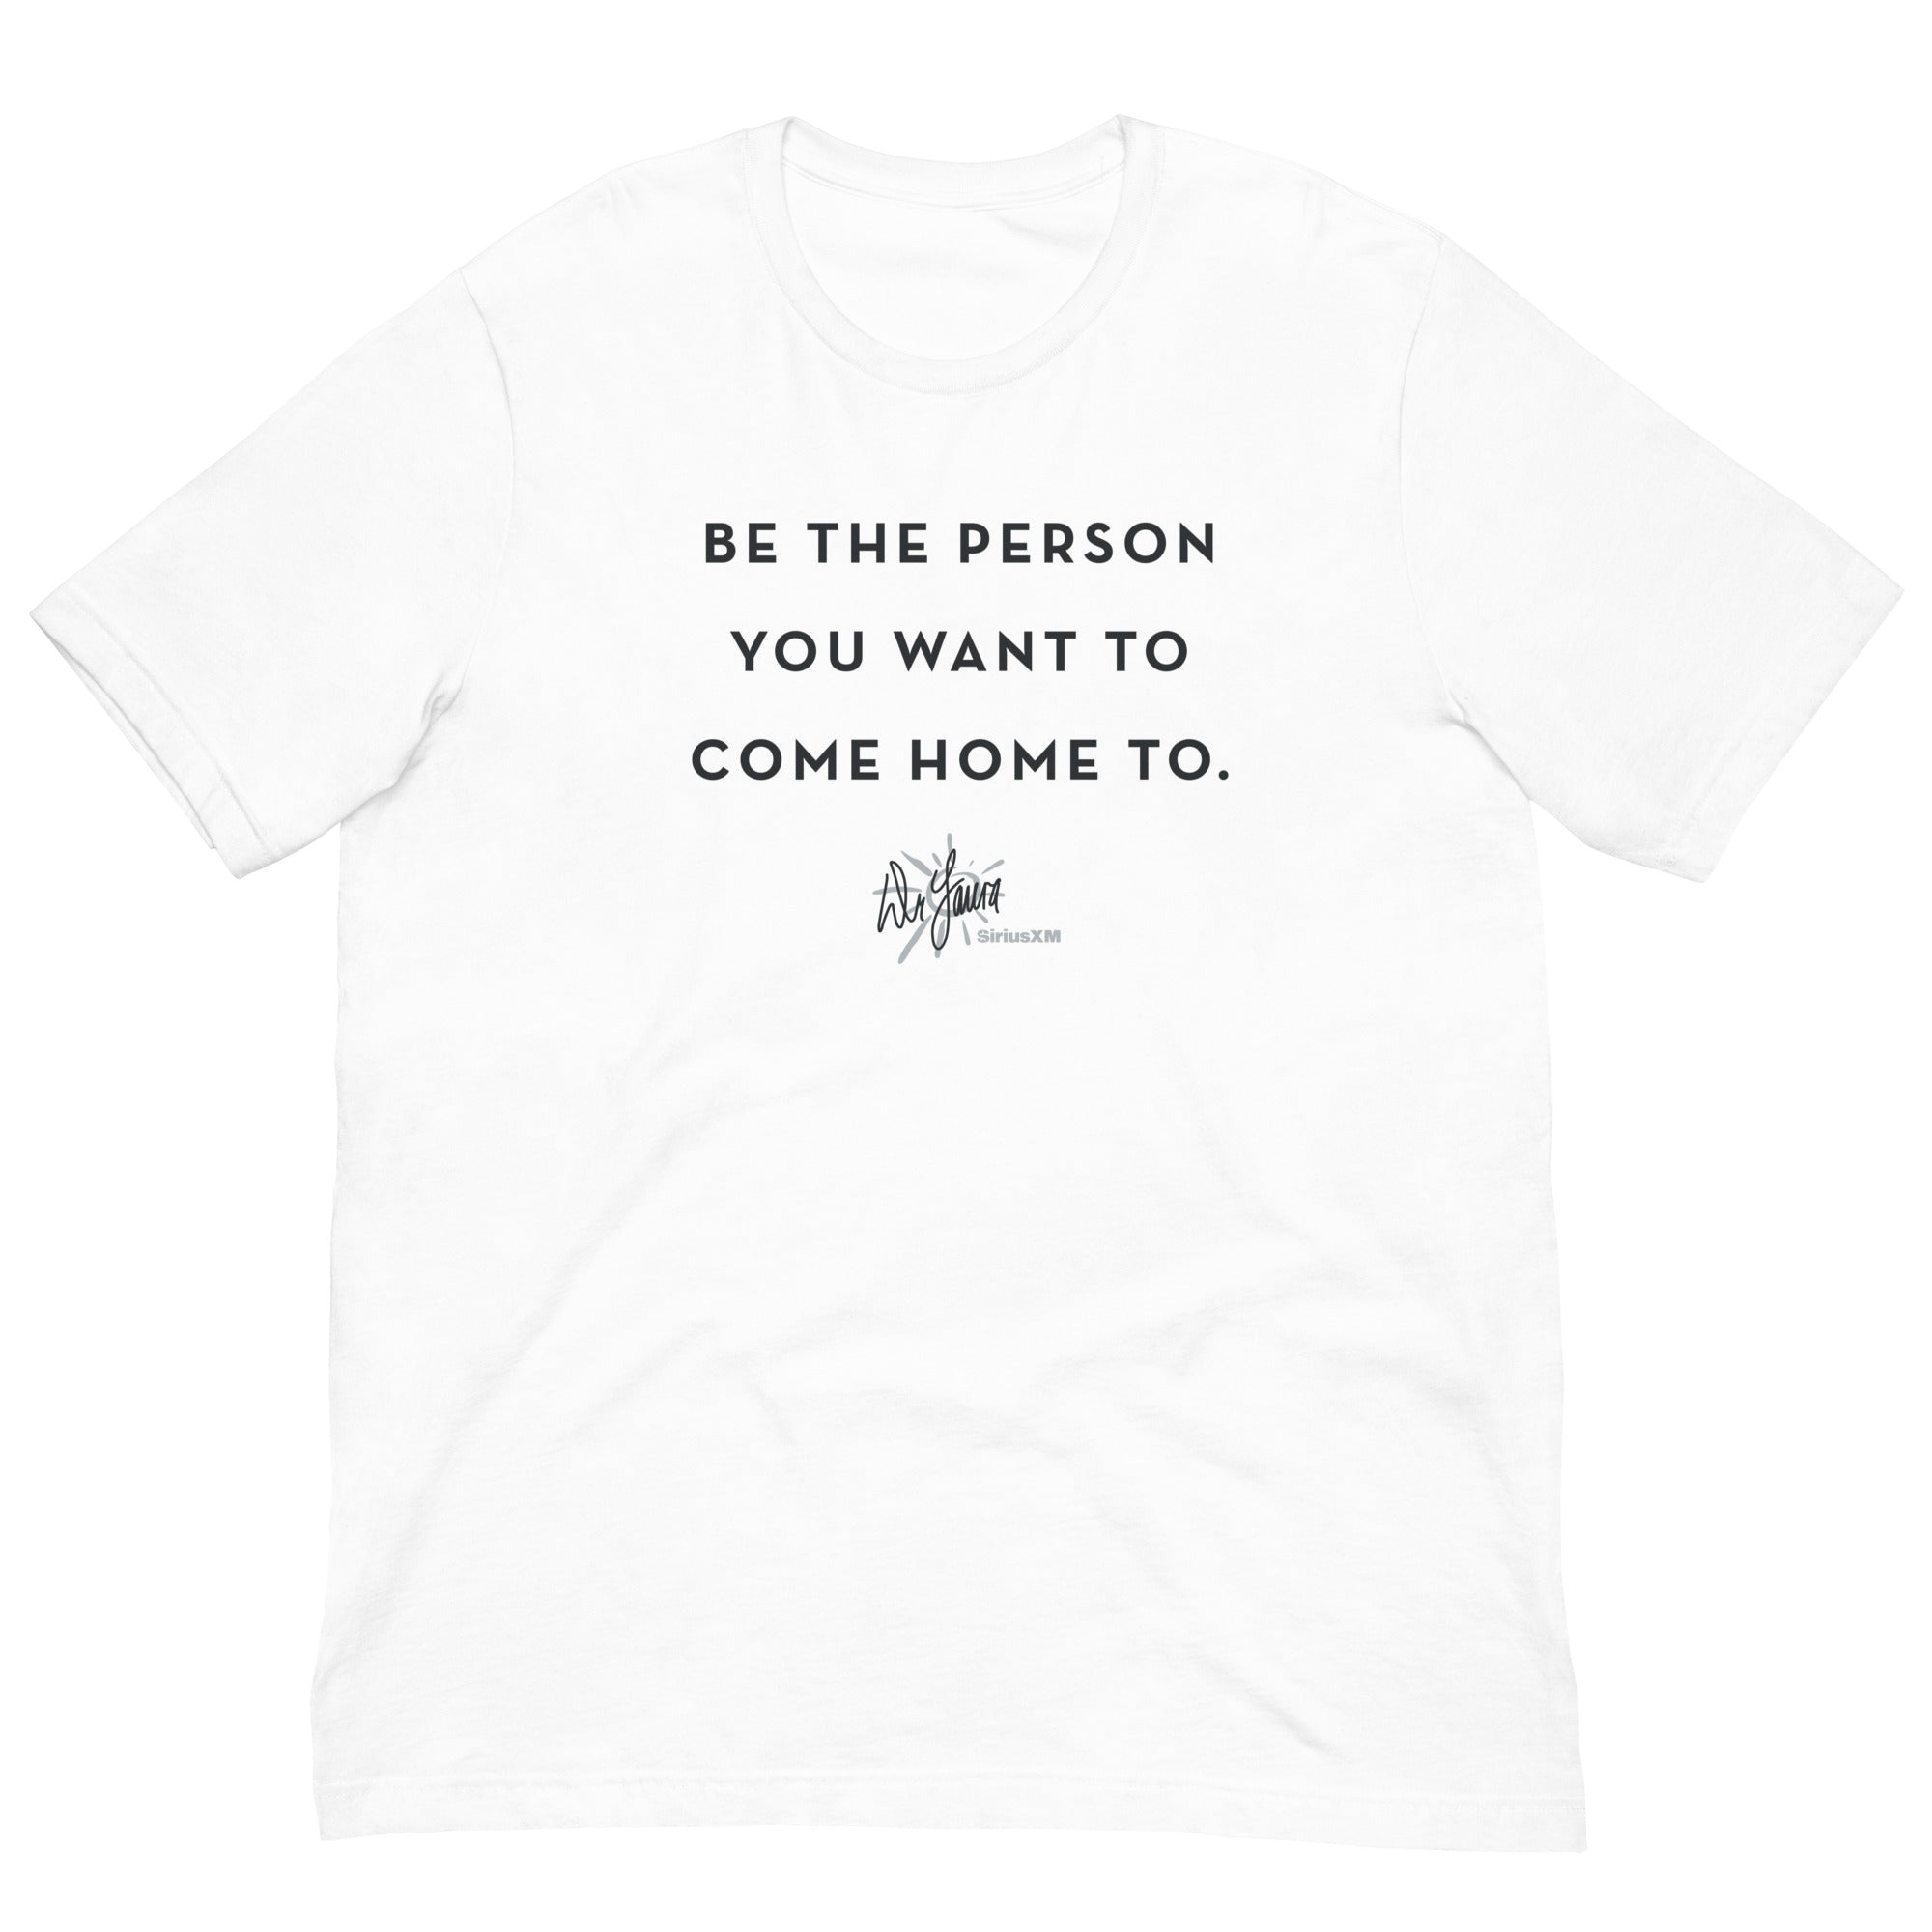 Dr. Laura: Be The Person T-shirt